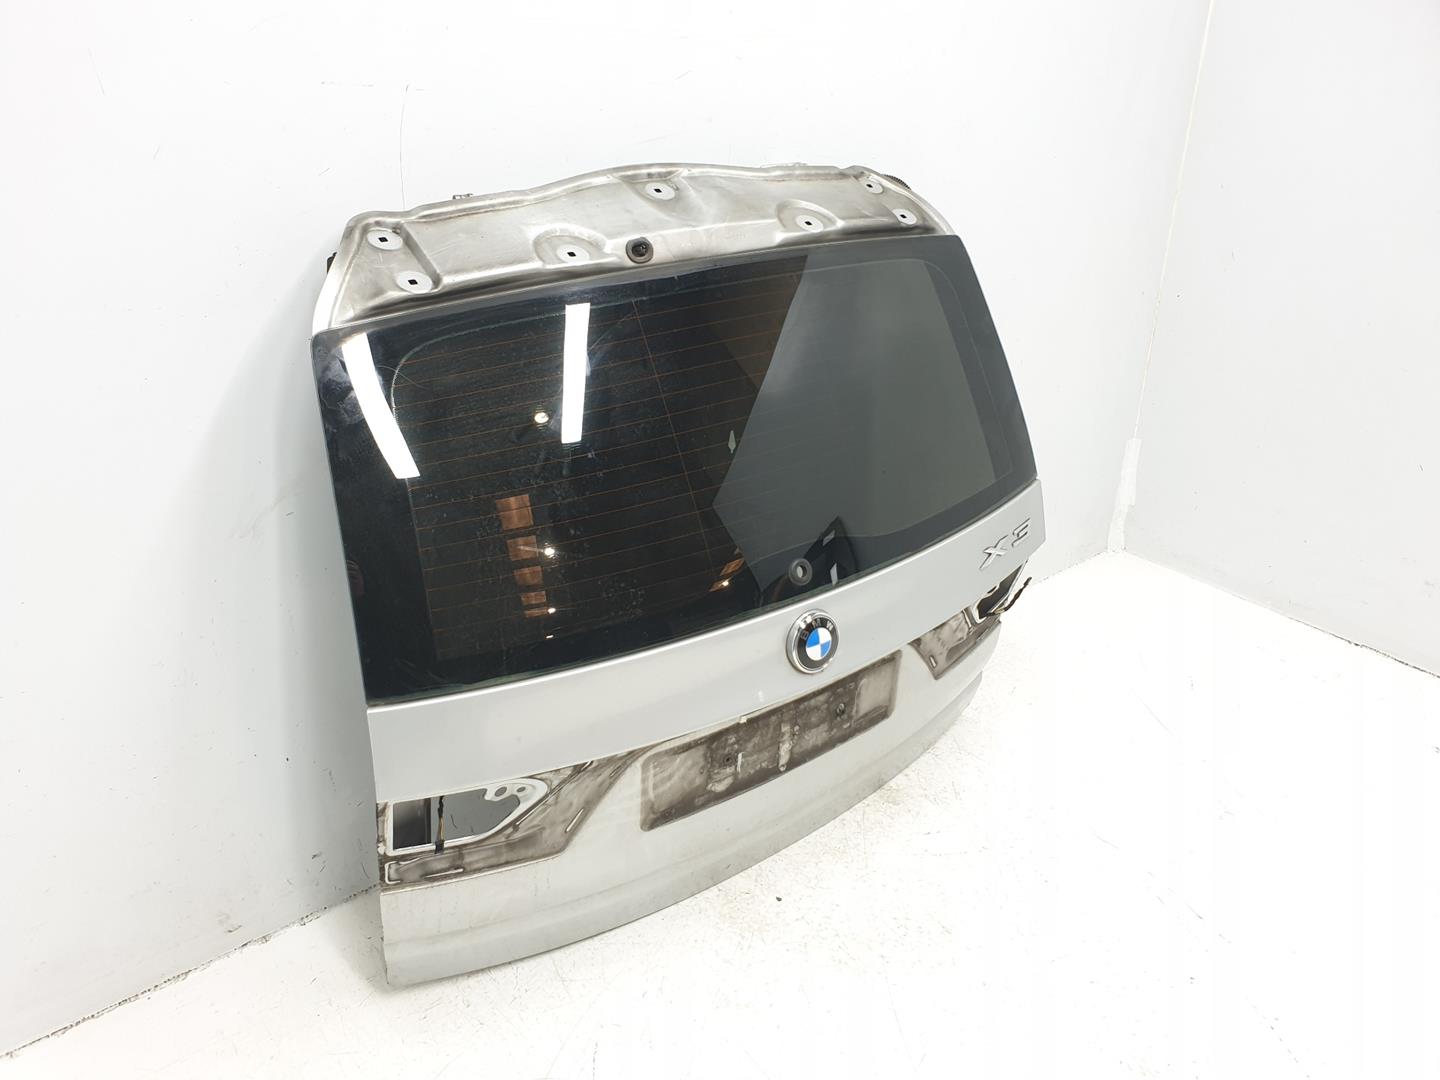 BMW X3 E83 (2003-2010) Bootlid Rear Boot 41003452197, 41003452197 24238163